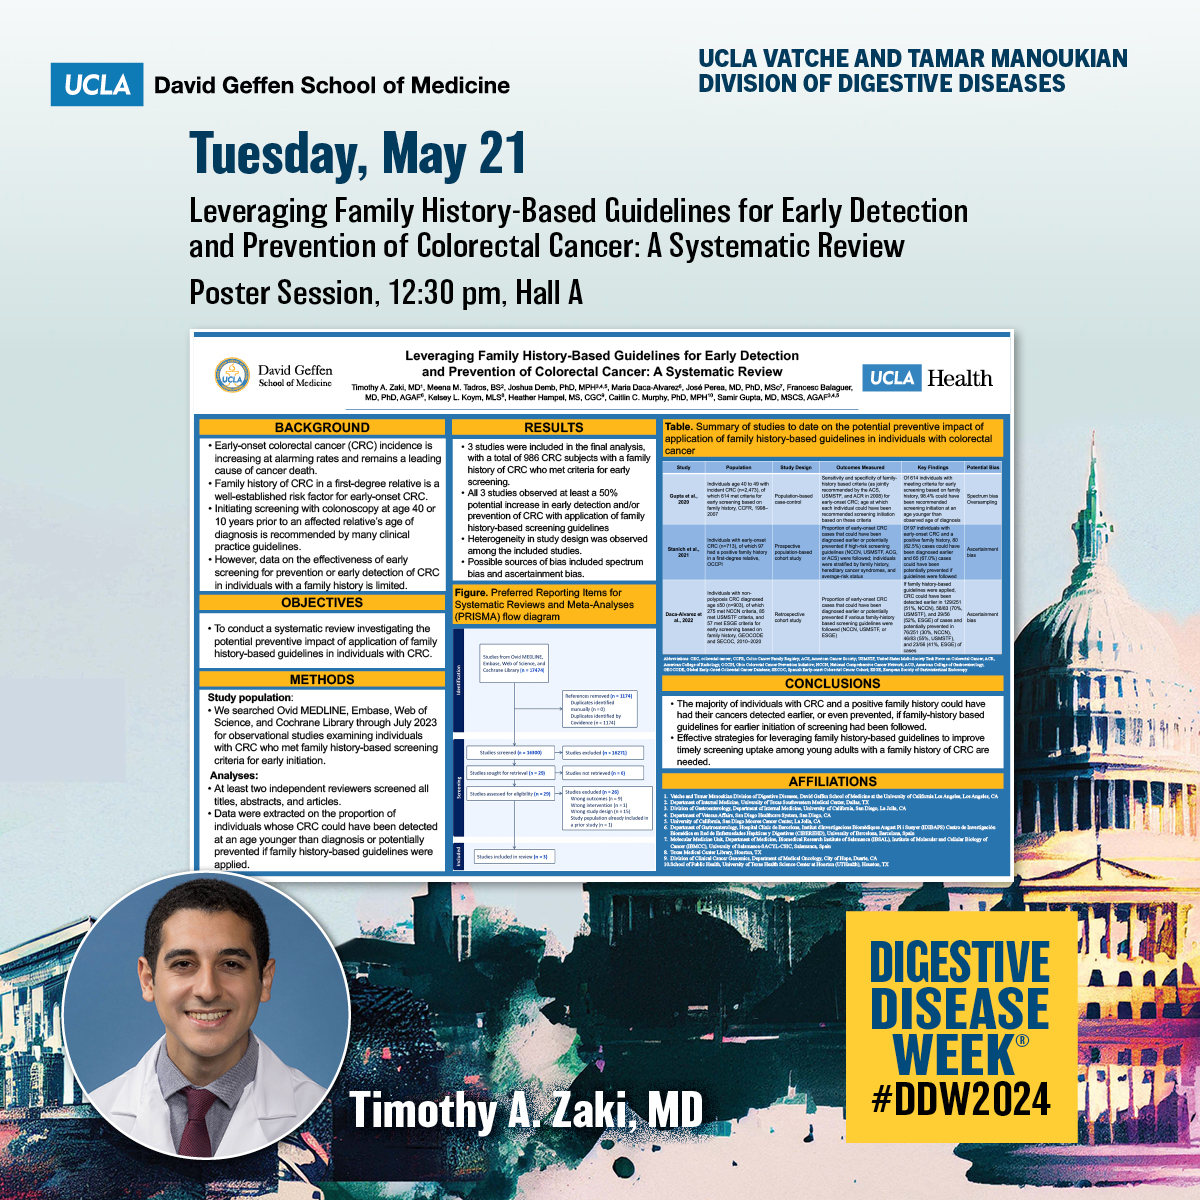 Leveraging Family History-Based Guidelines for Early Detection and Prevention of #ColorectalCancer: A Systematic Review

🙌Timothy A. Zaki, MD (@Timothy_A_Zaki, #UCLAGI)
🗓️#DDW2024 Tuesday, May 21, 12:30 pm, Hall A